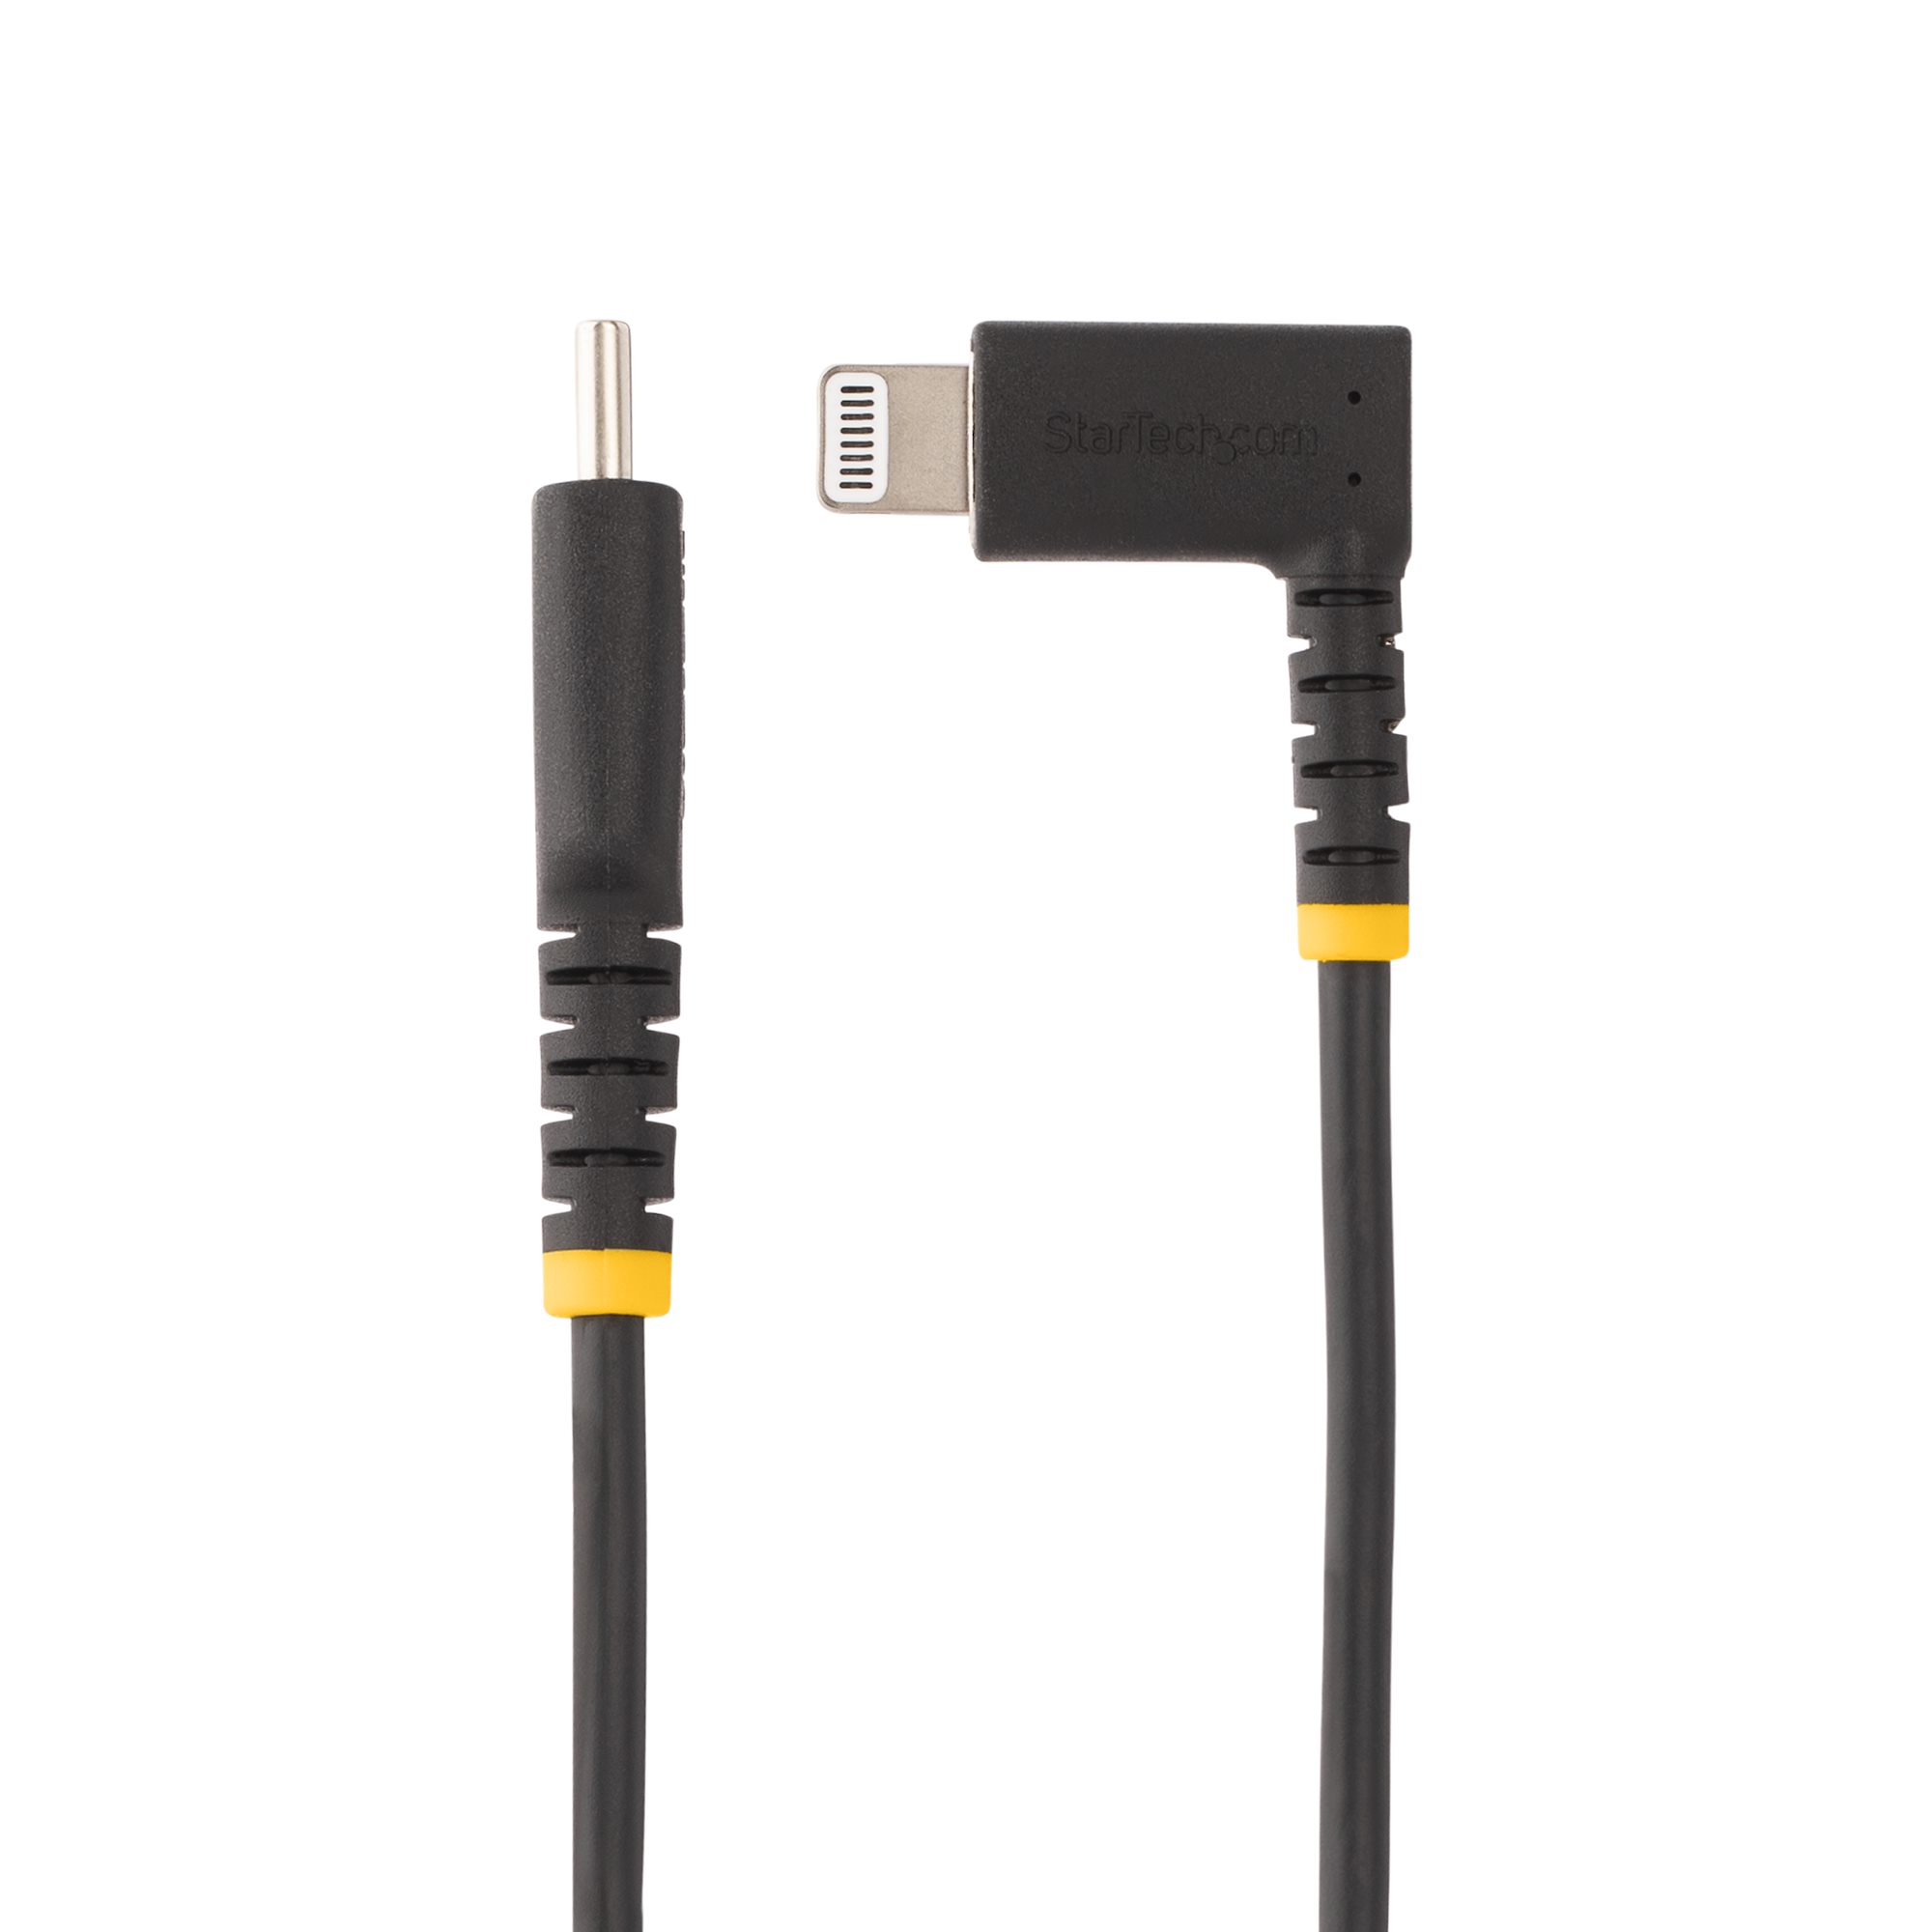 Product  StarTech.com 6ft (2m) USB C Charging Cable Right Angle